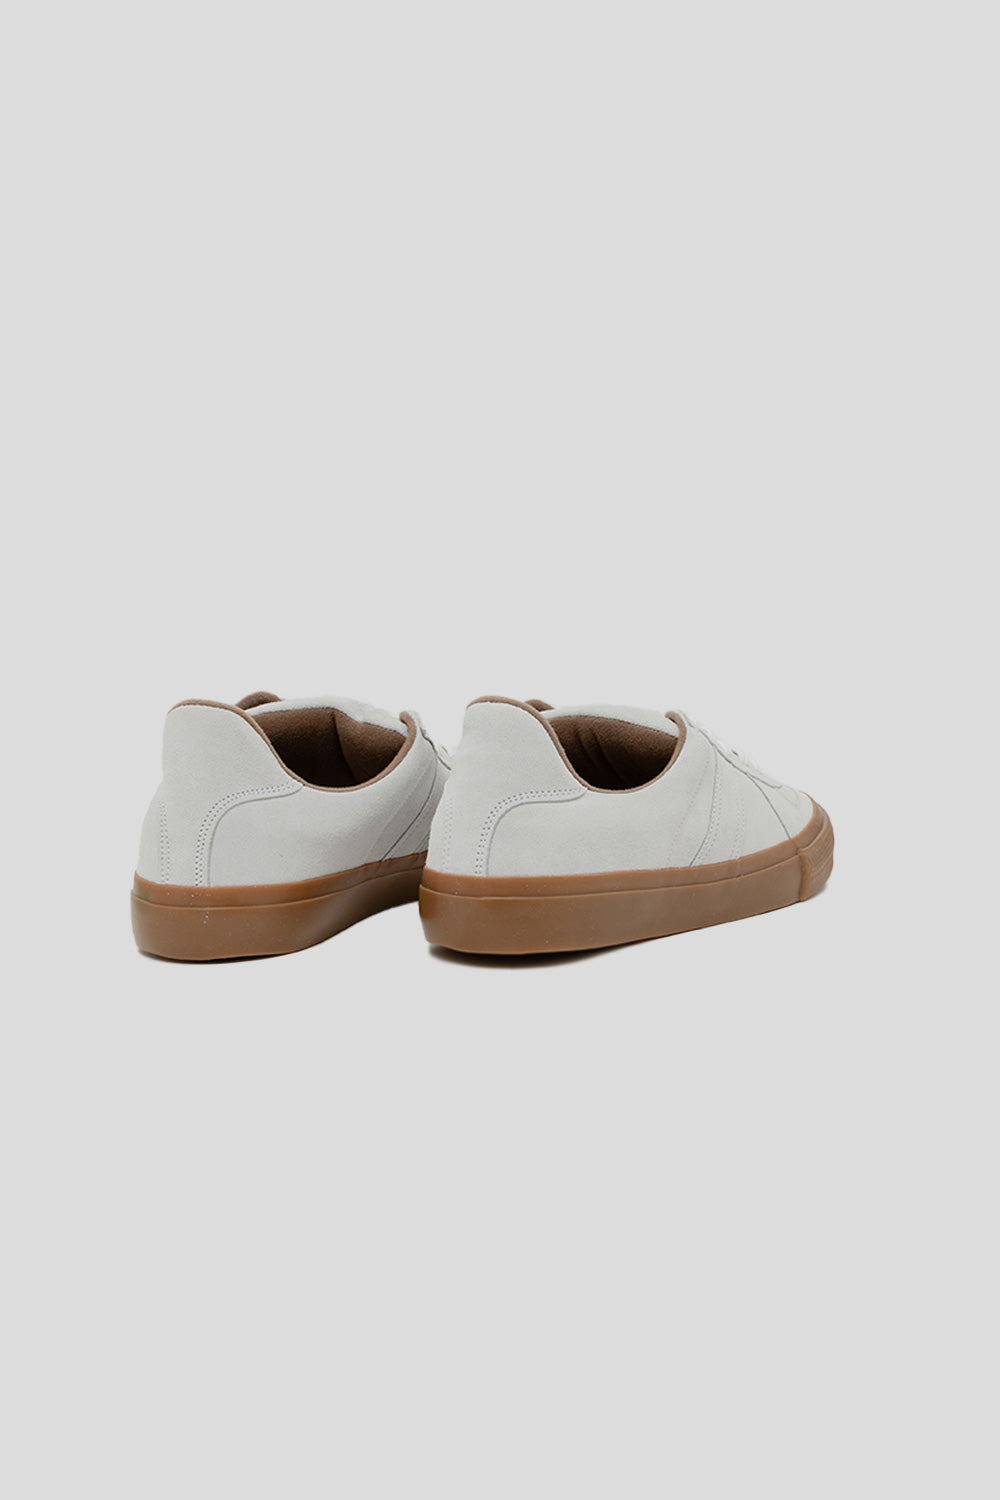 Reproduction of Found German Military Trainer in White Suede | Wallace